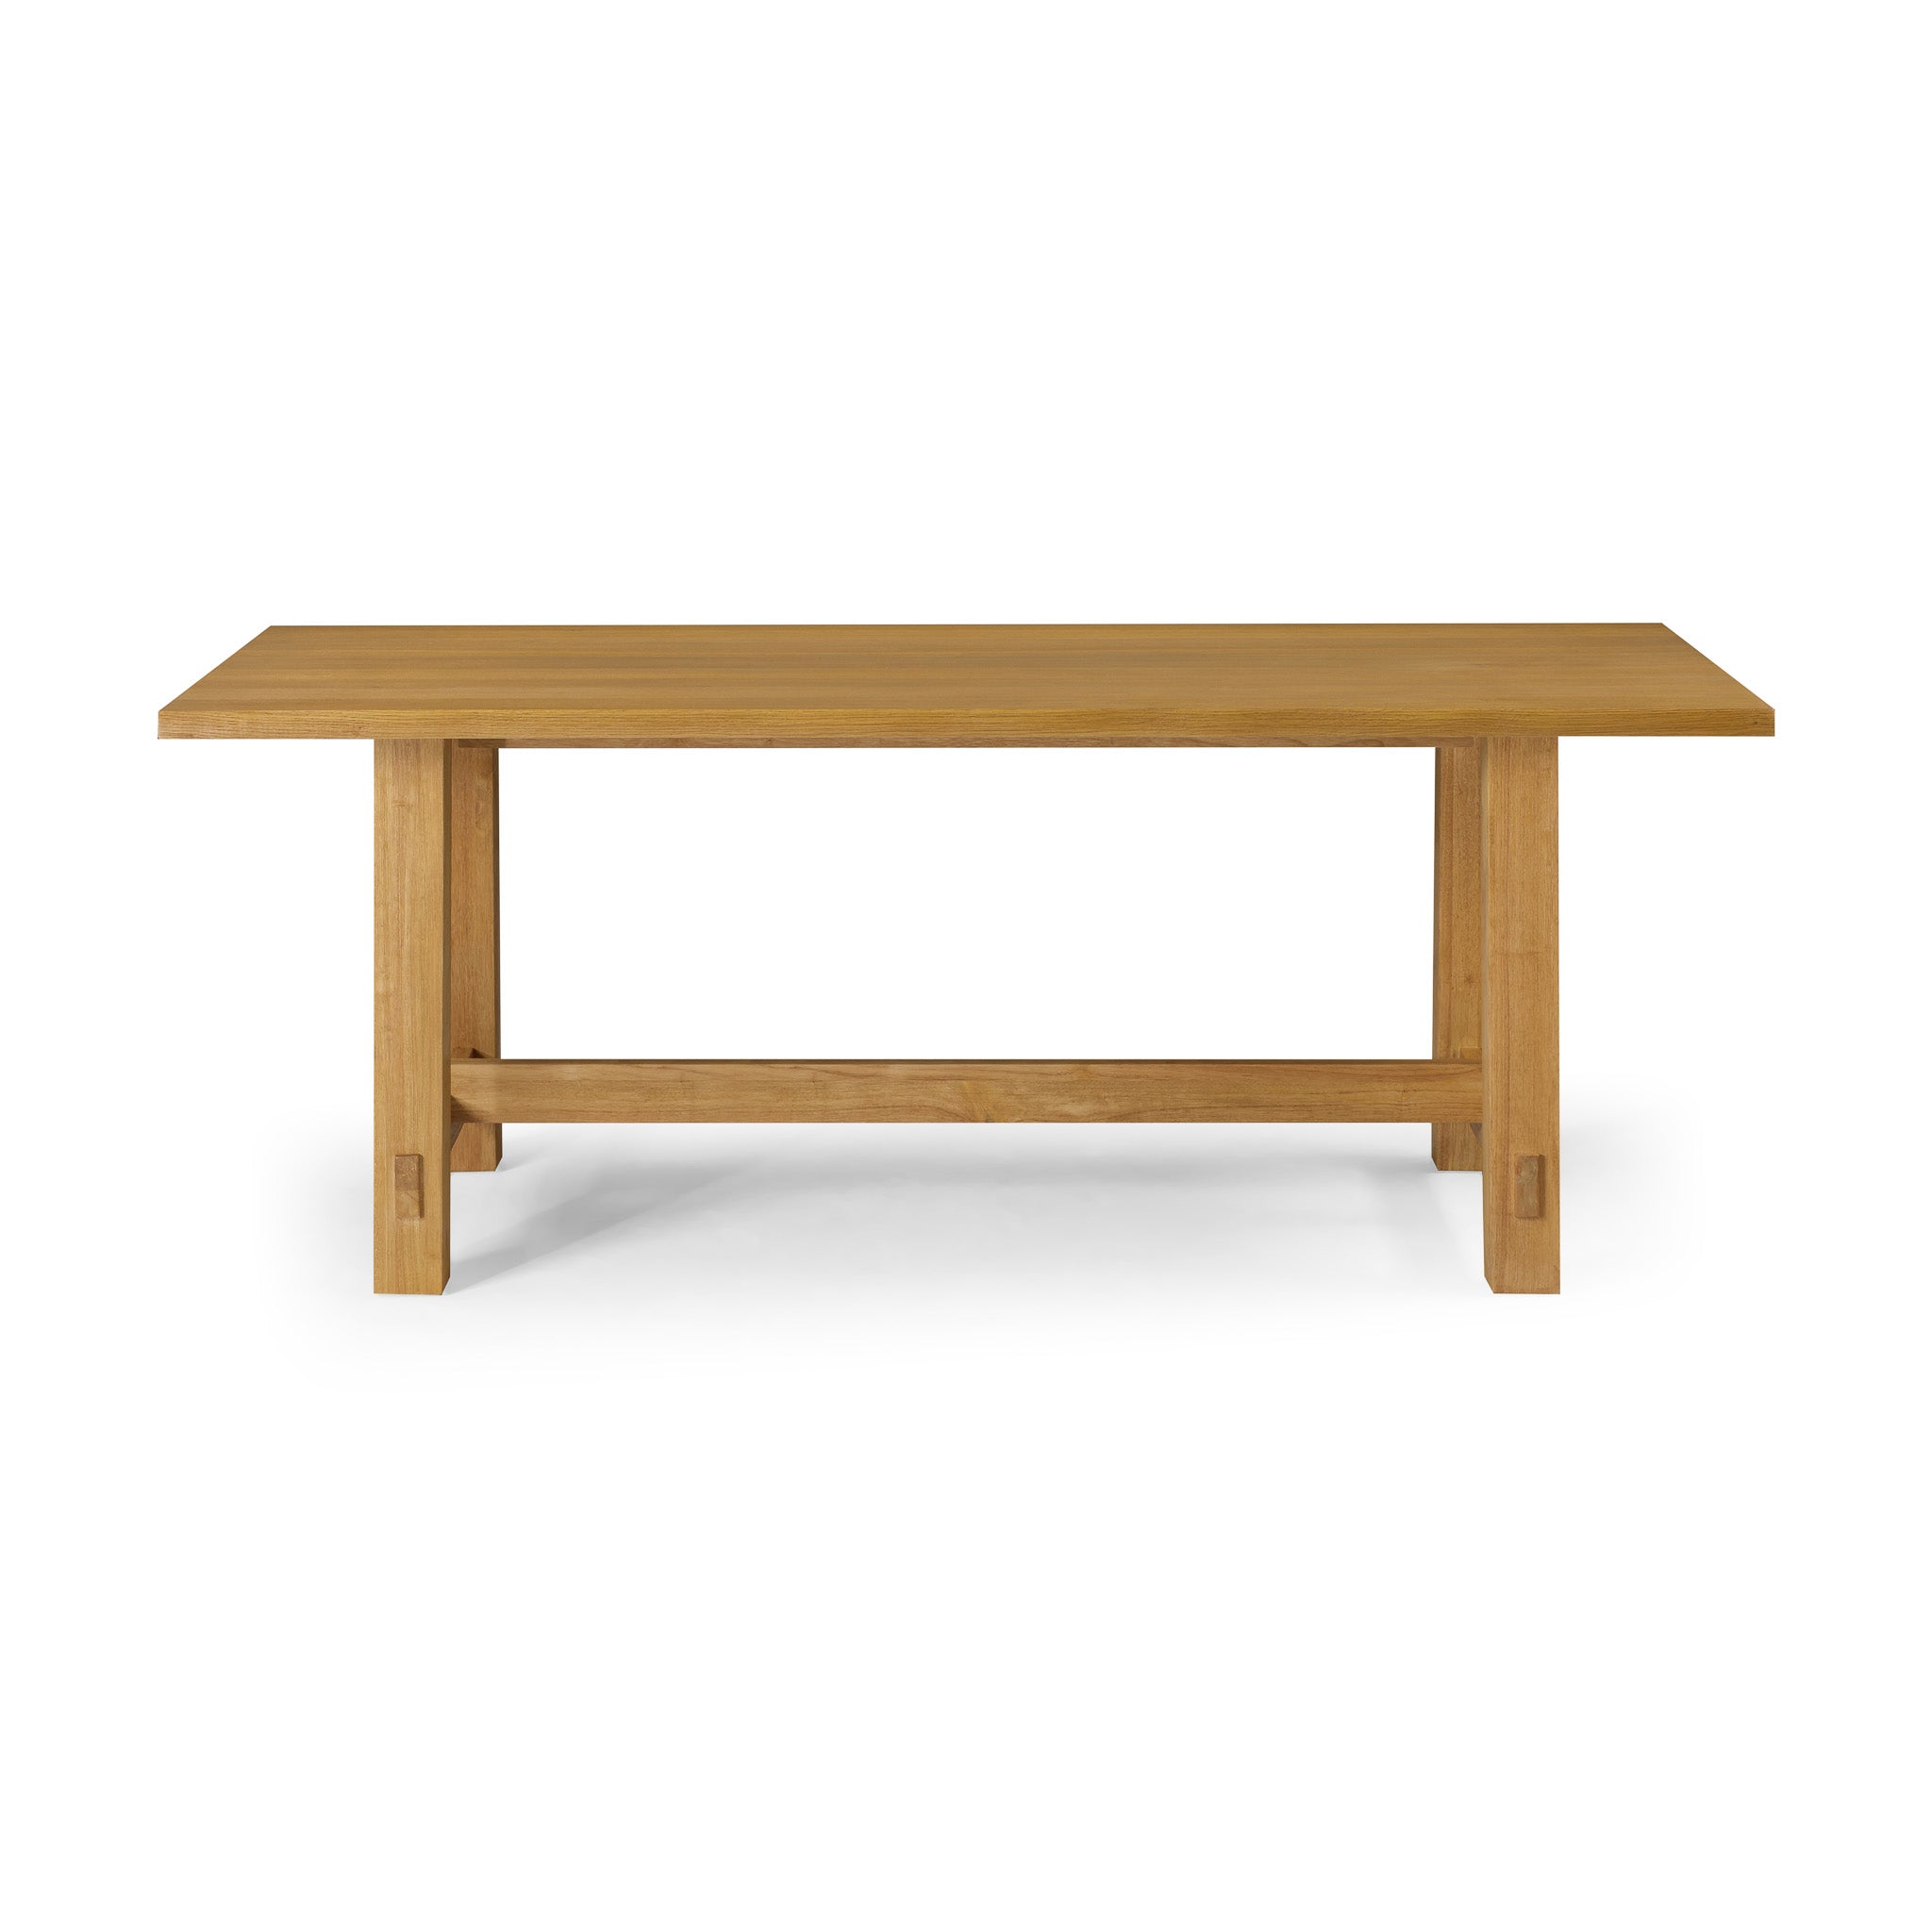 Yves Organic Rectangular Wooden Dining Table in Weathered Natural Finish in Dining Furniture by Maven Lane